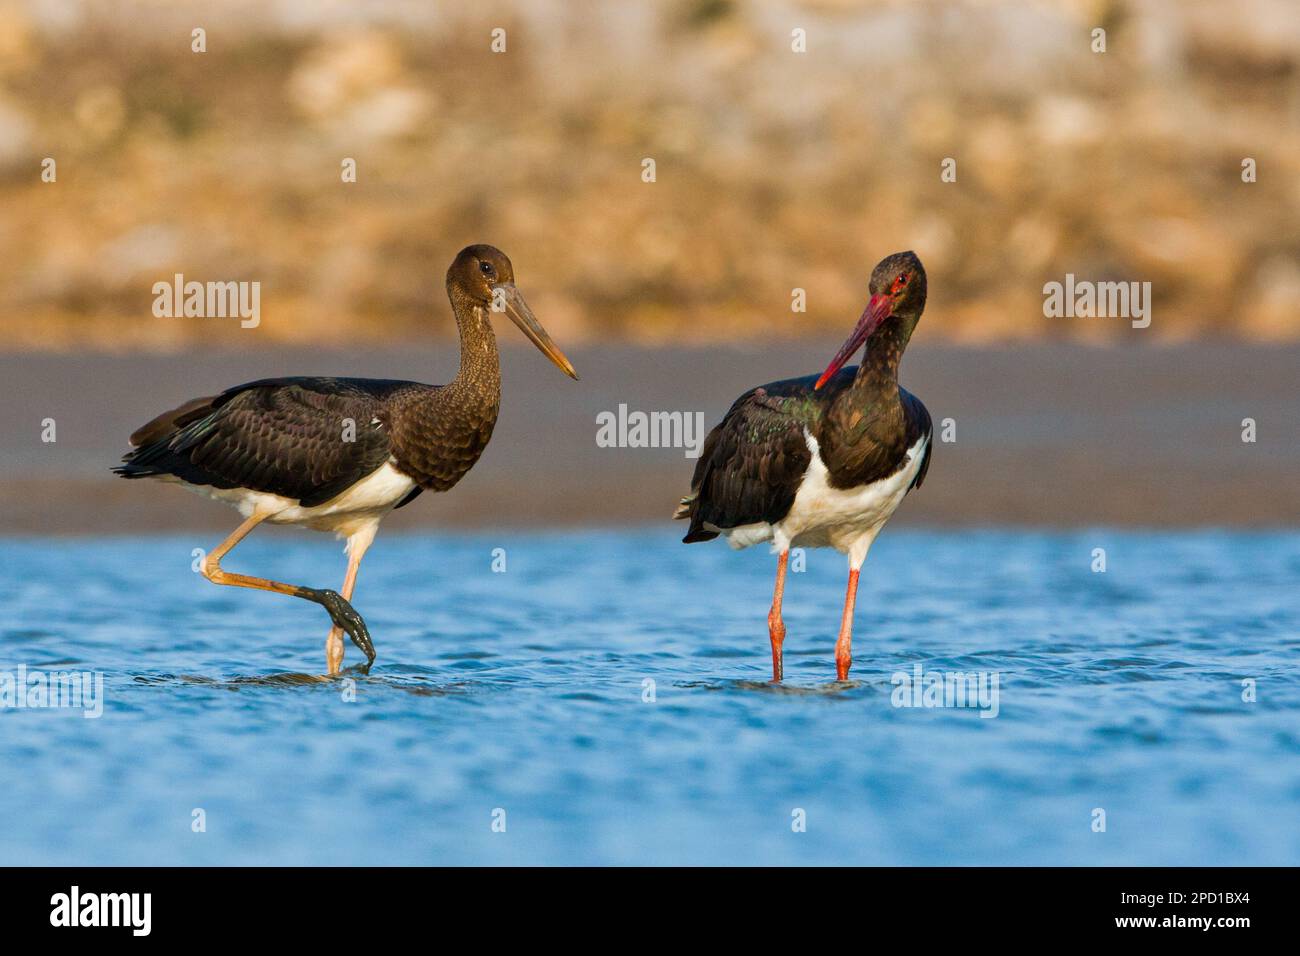 black stork (Ciconia nigra) foraging for food in shallow water Photographed in Israel This wader inhabits wetland areas, feeding on fish, small animal Stock Photo